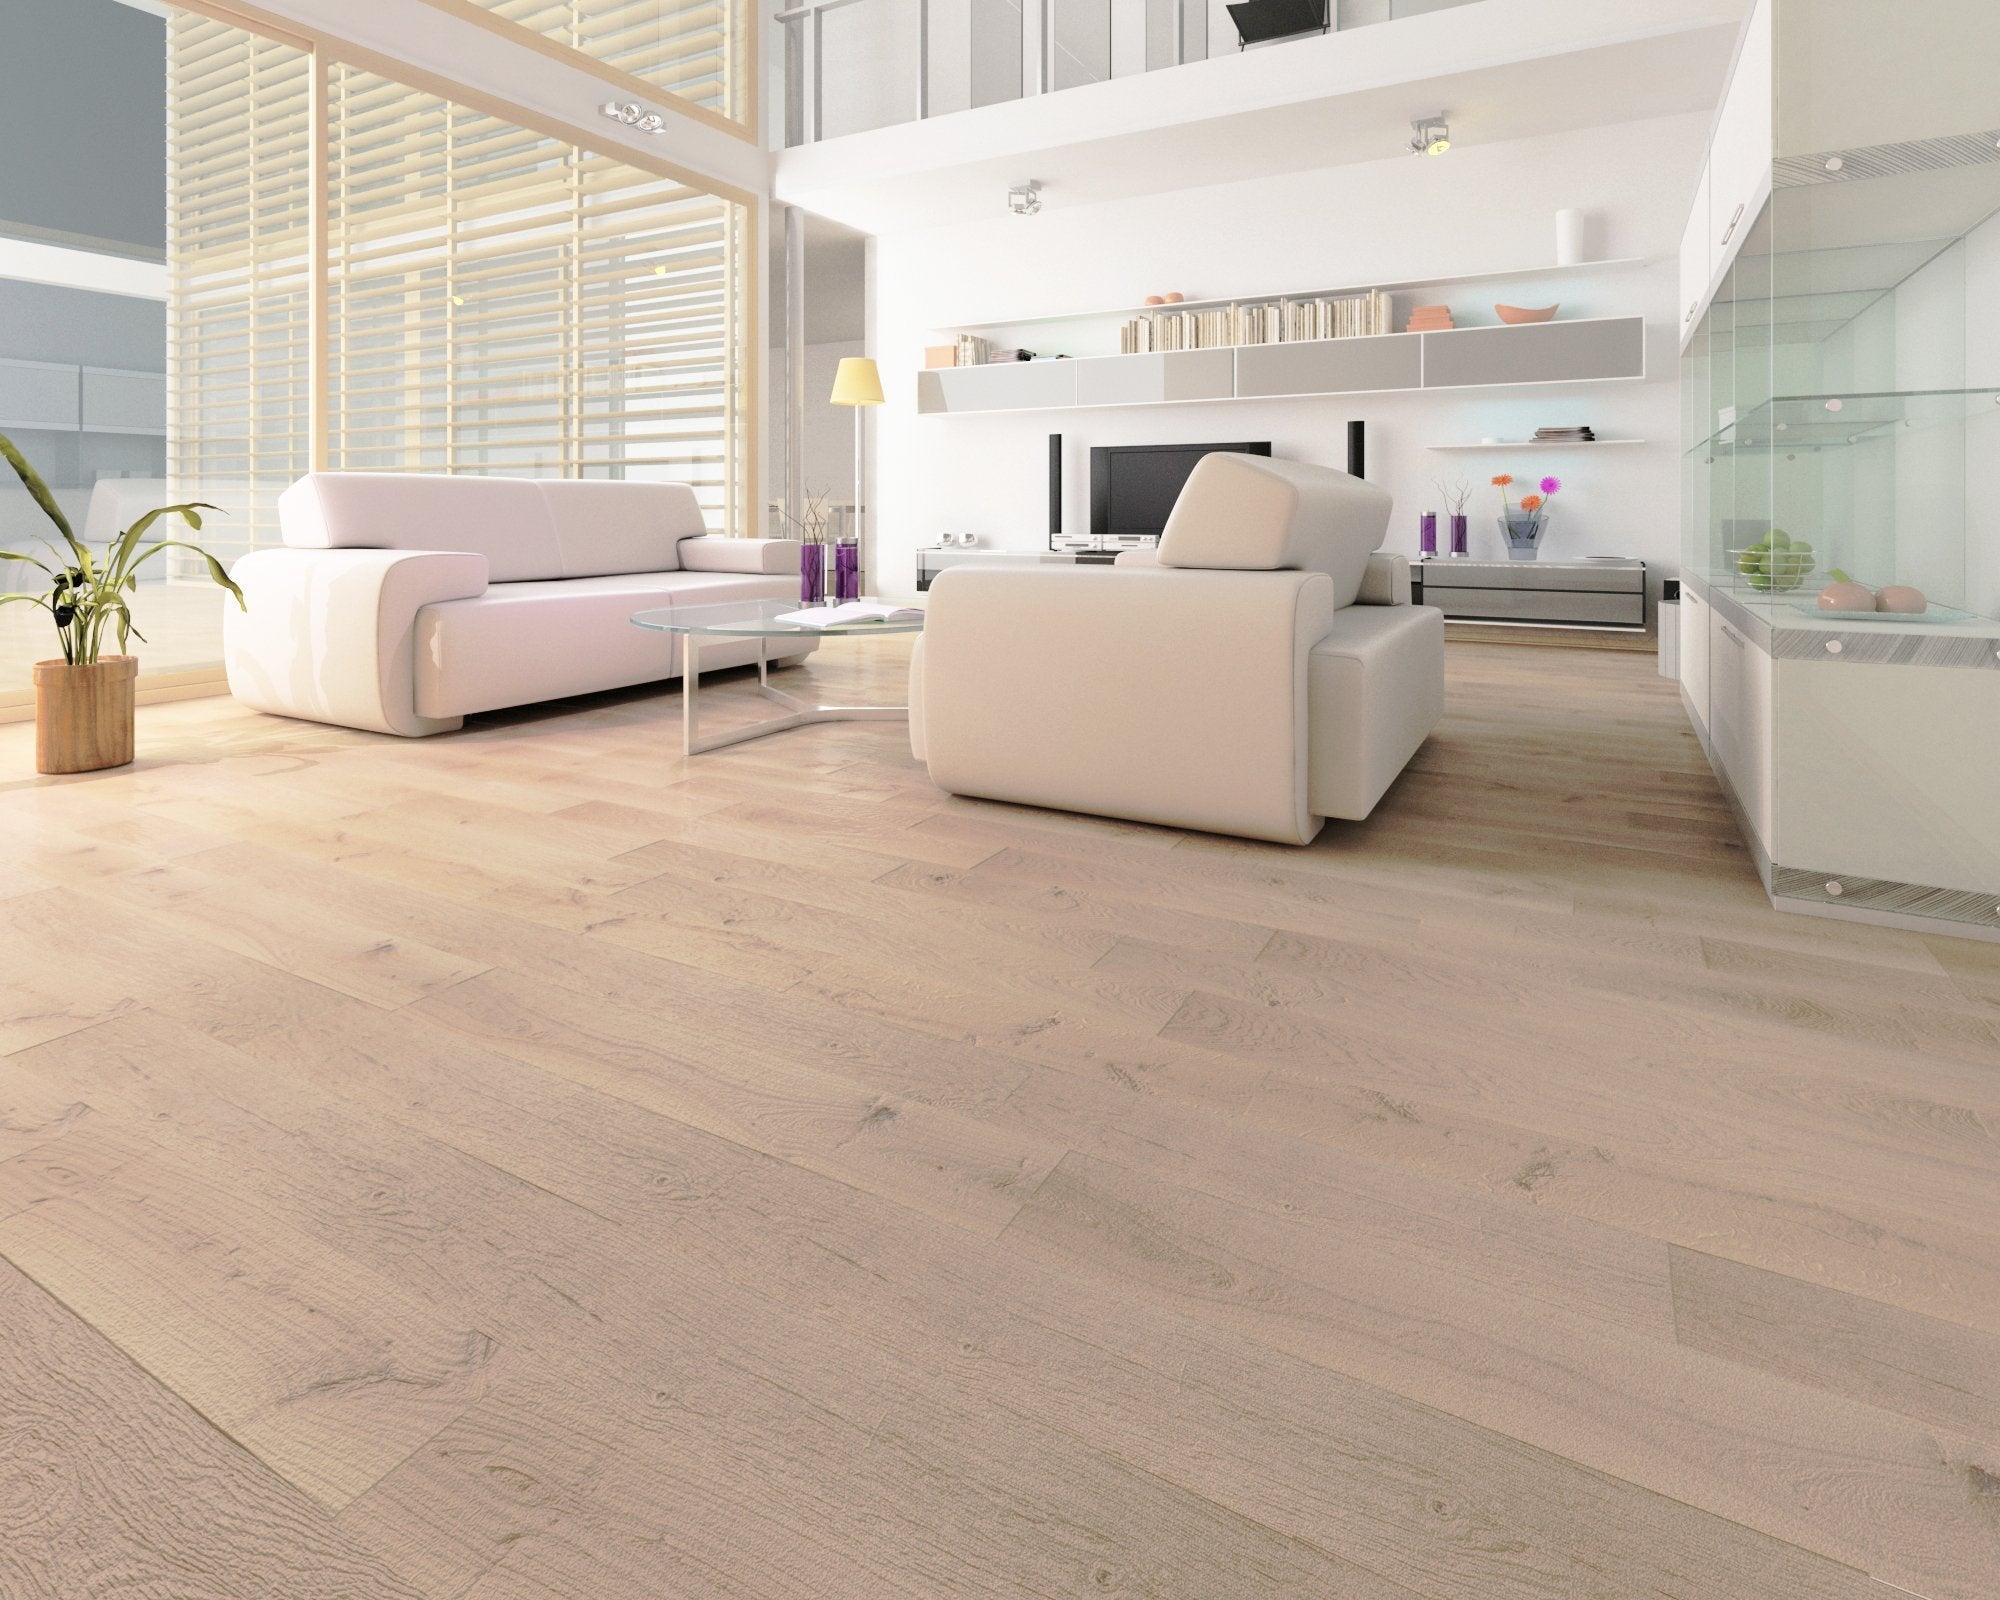 teka colonial richmond german french white oak natural hardwood flooring plank natural matte lacquer distributed by surface group international